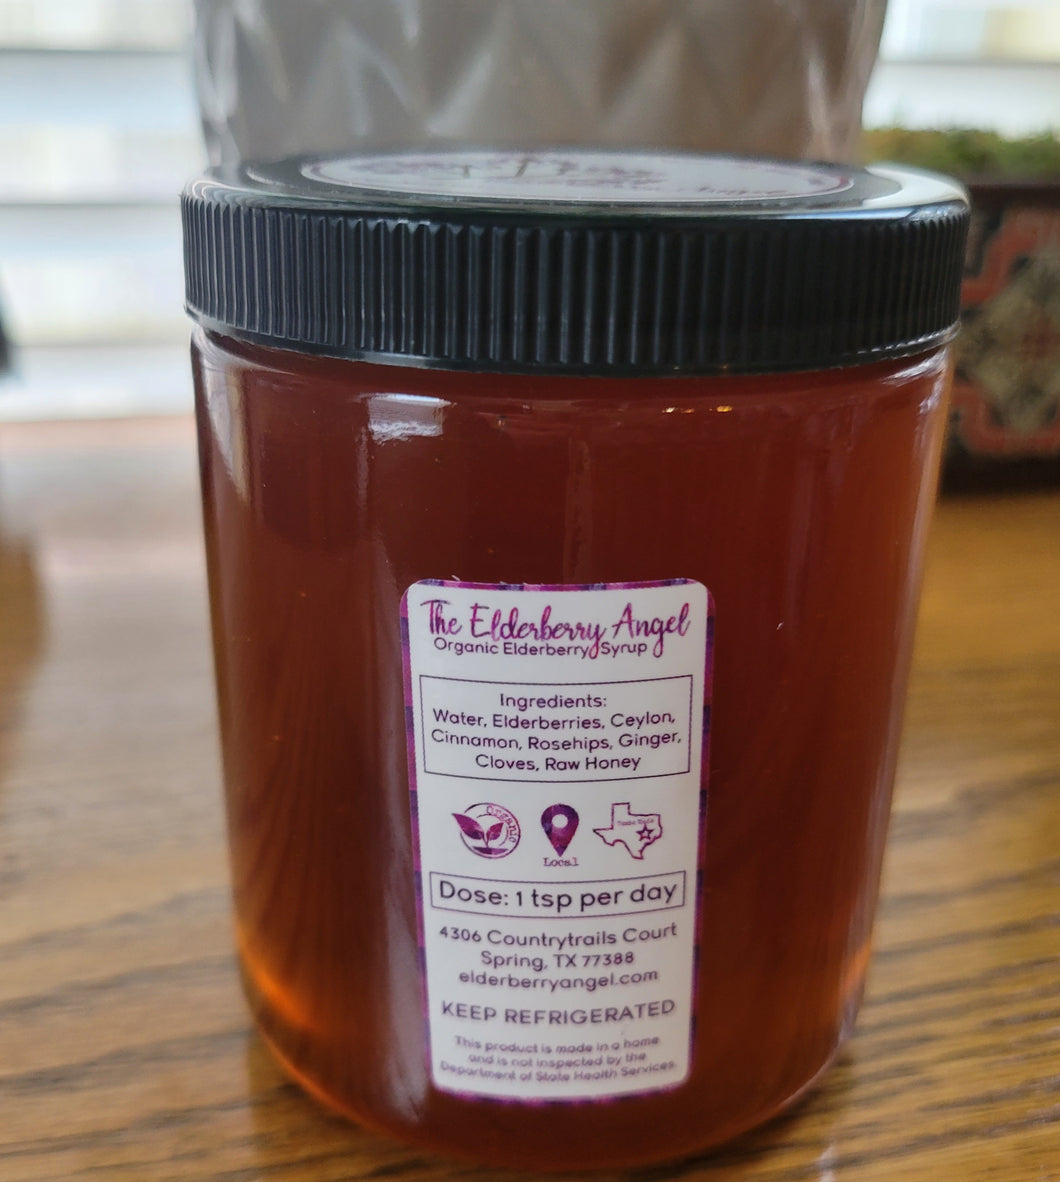 8oz raw, local unfiltered honey